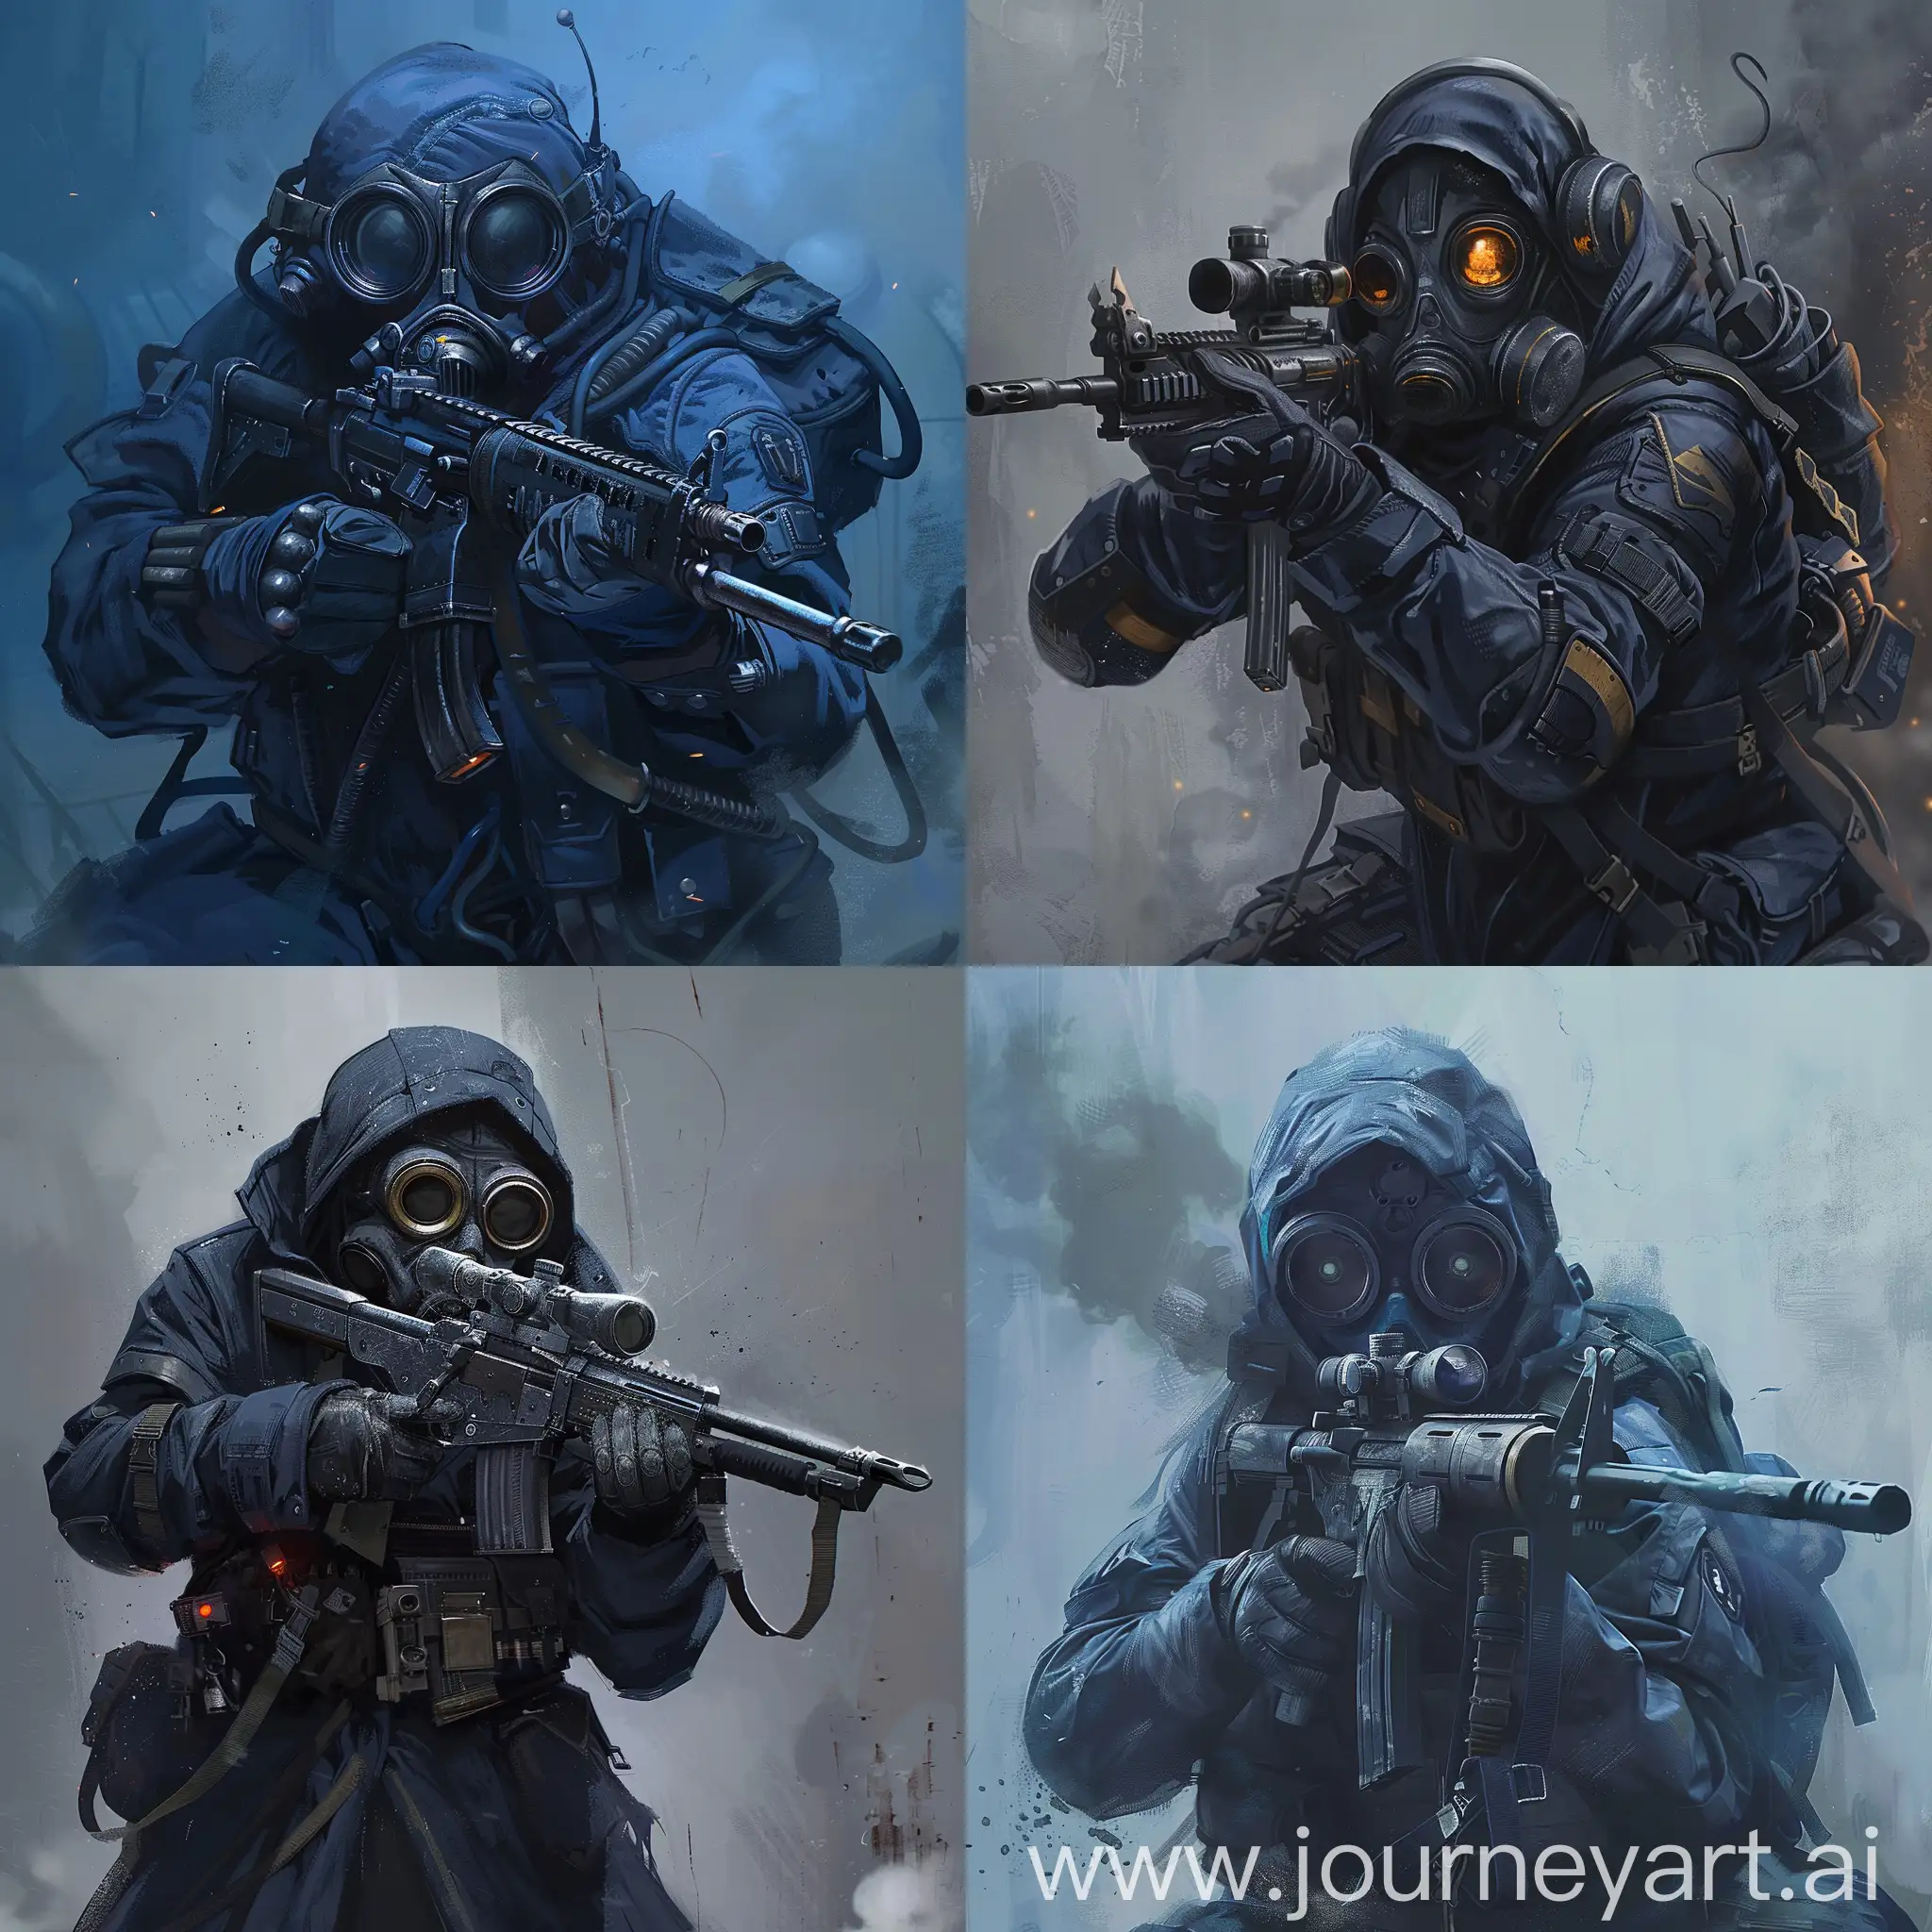 Mercenary from game stalker concept art in gasmask, wearing dark blue military heavy juggernaut armor suit, holding a sniper rifle in the hands